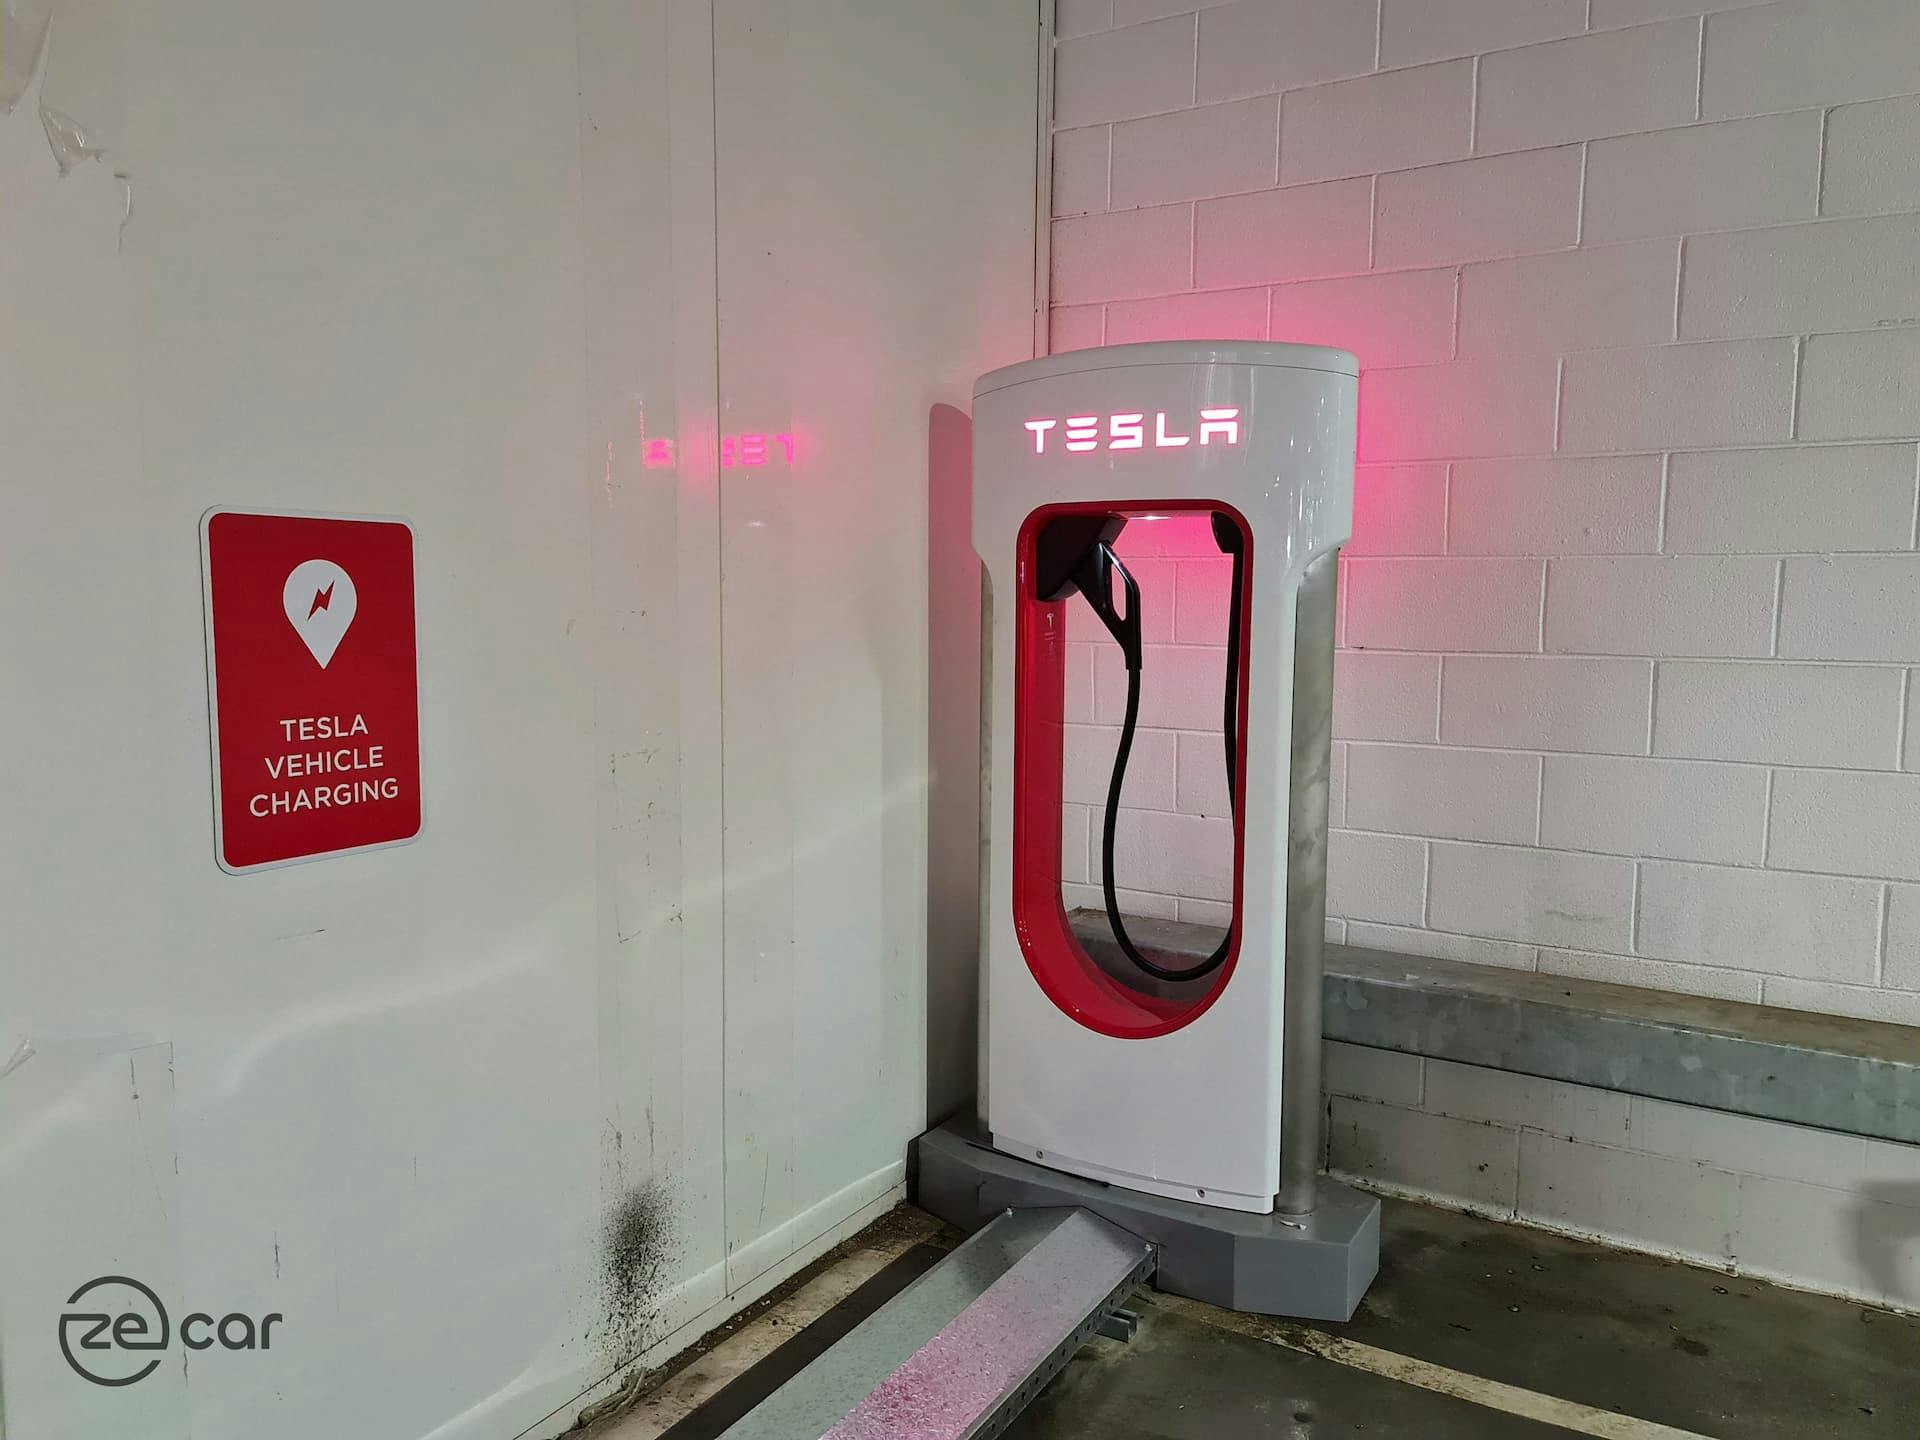 Toombul Tesla Supercharger stall with Tesla Vehicle Charging sign on the wall